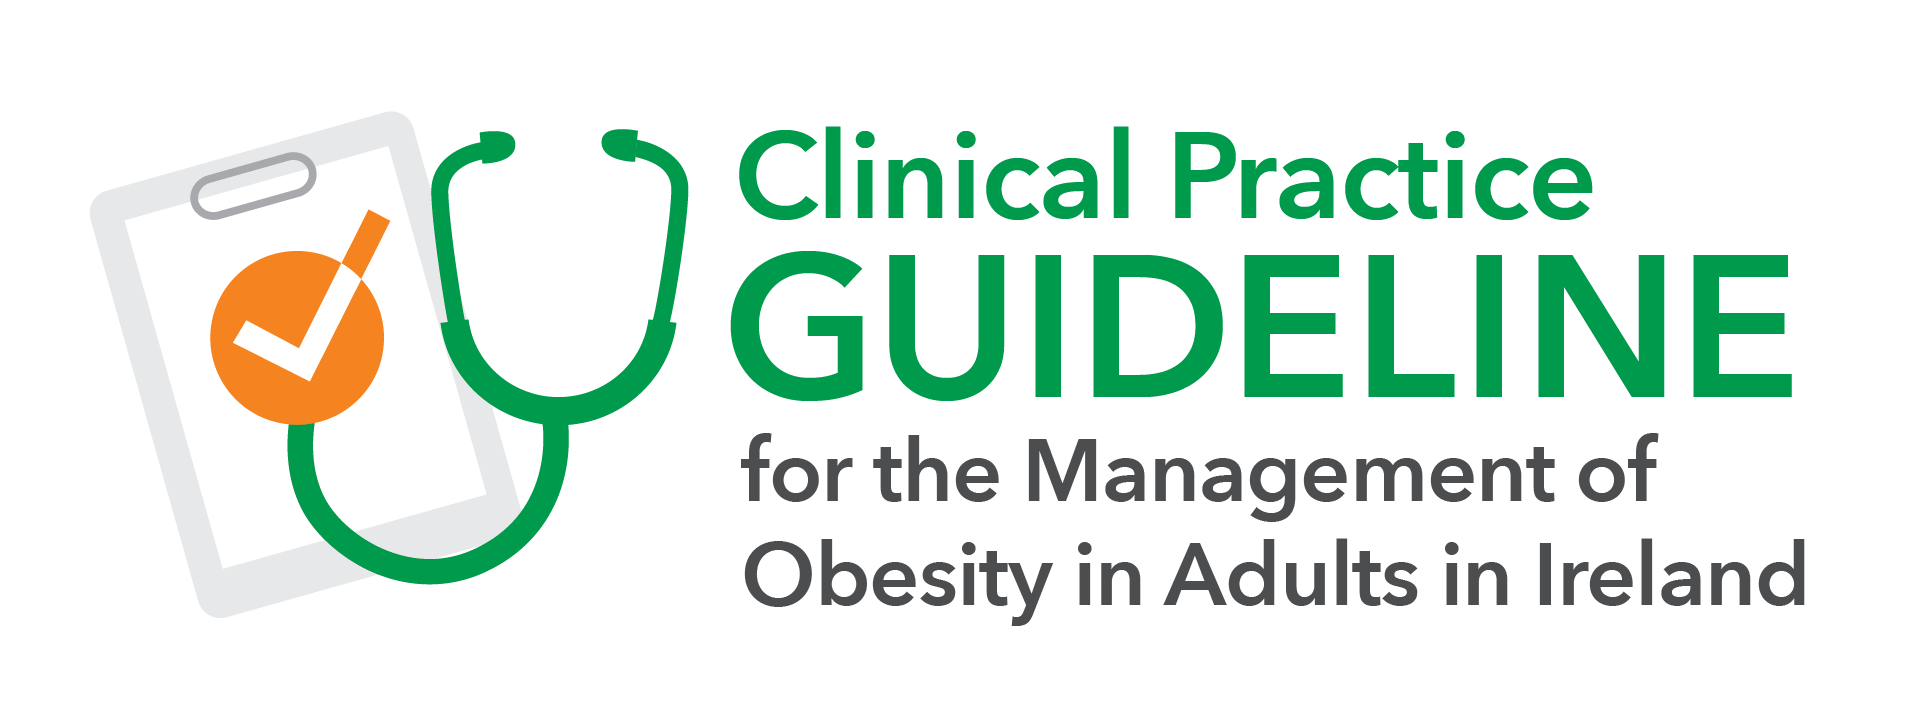 Graphic depicting a stethoscope and clipboard with the text "clinical practice guideline for the management of obesity in adults in ireland.